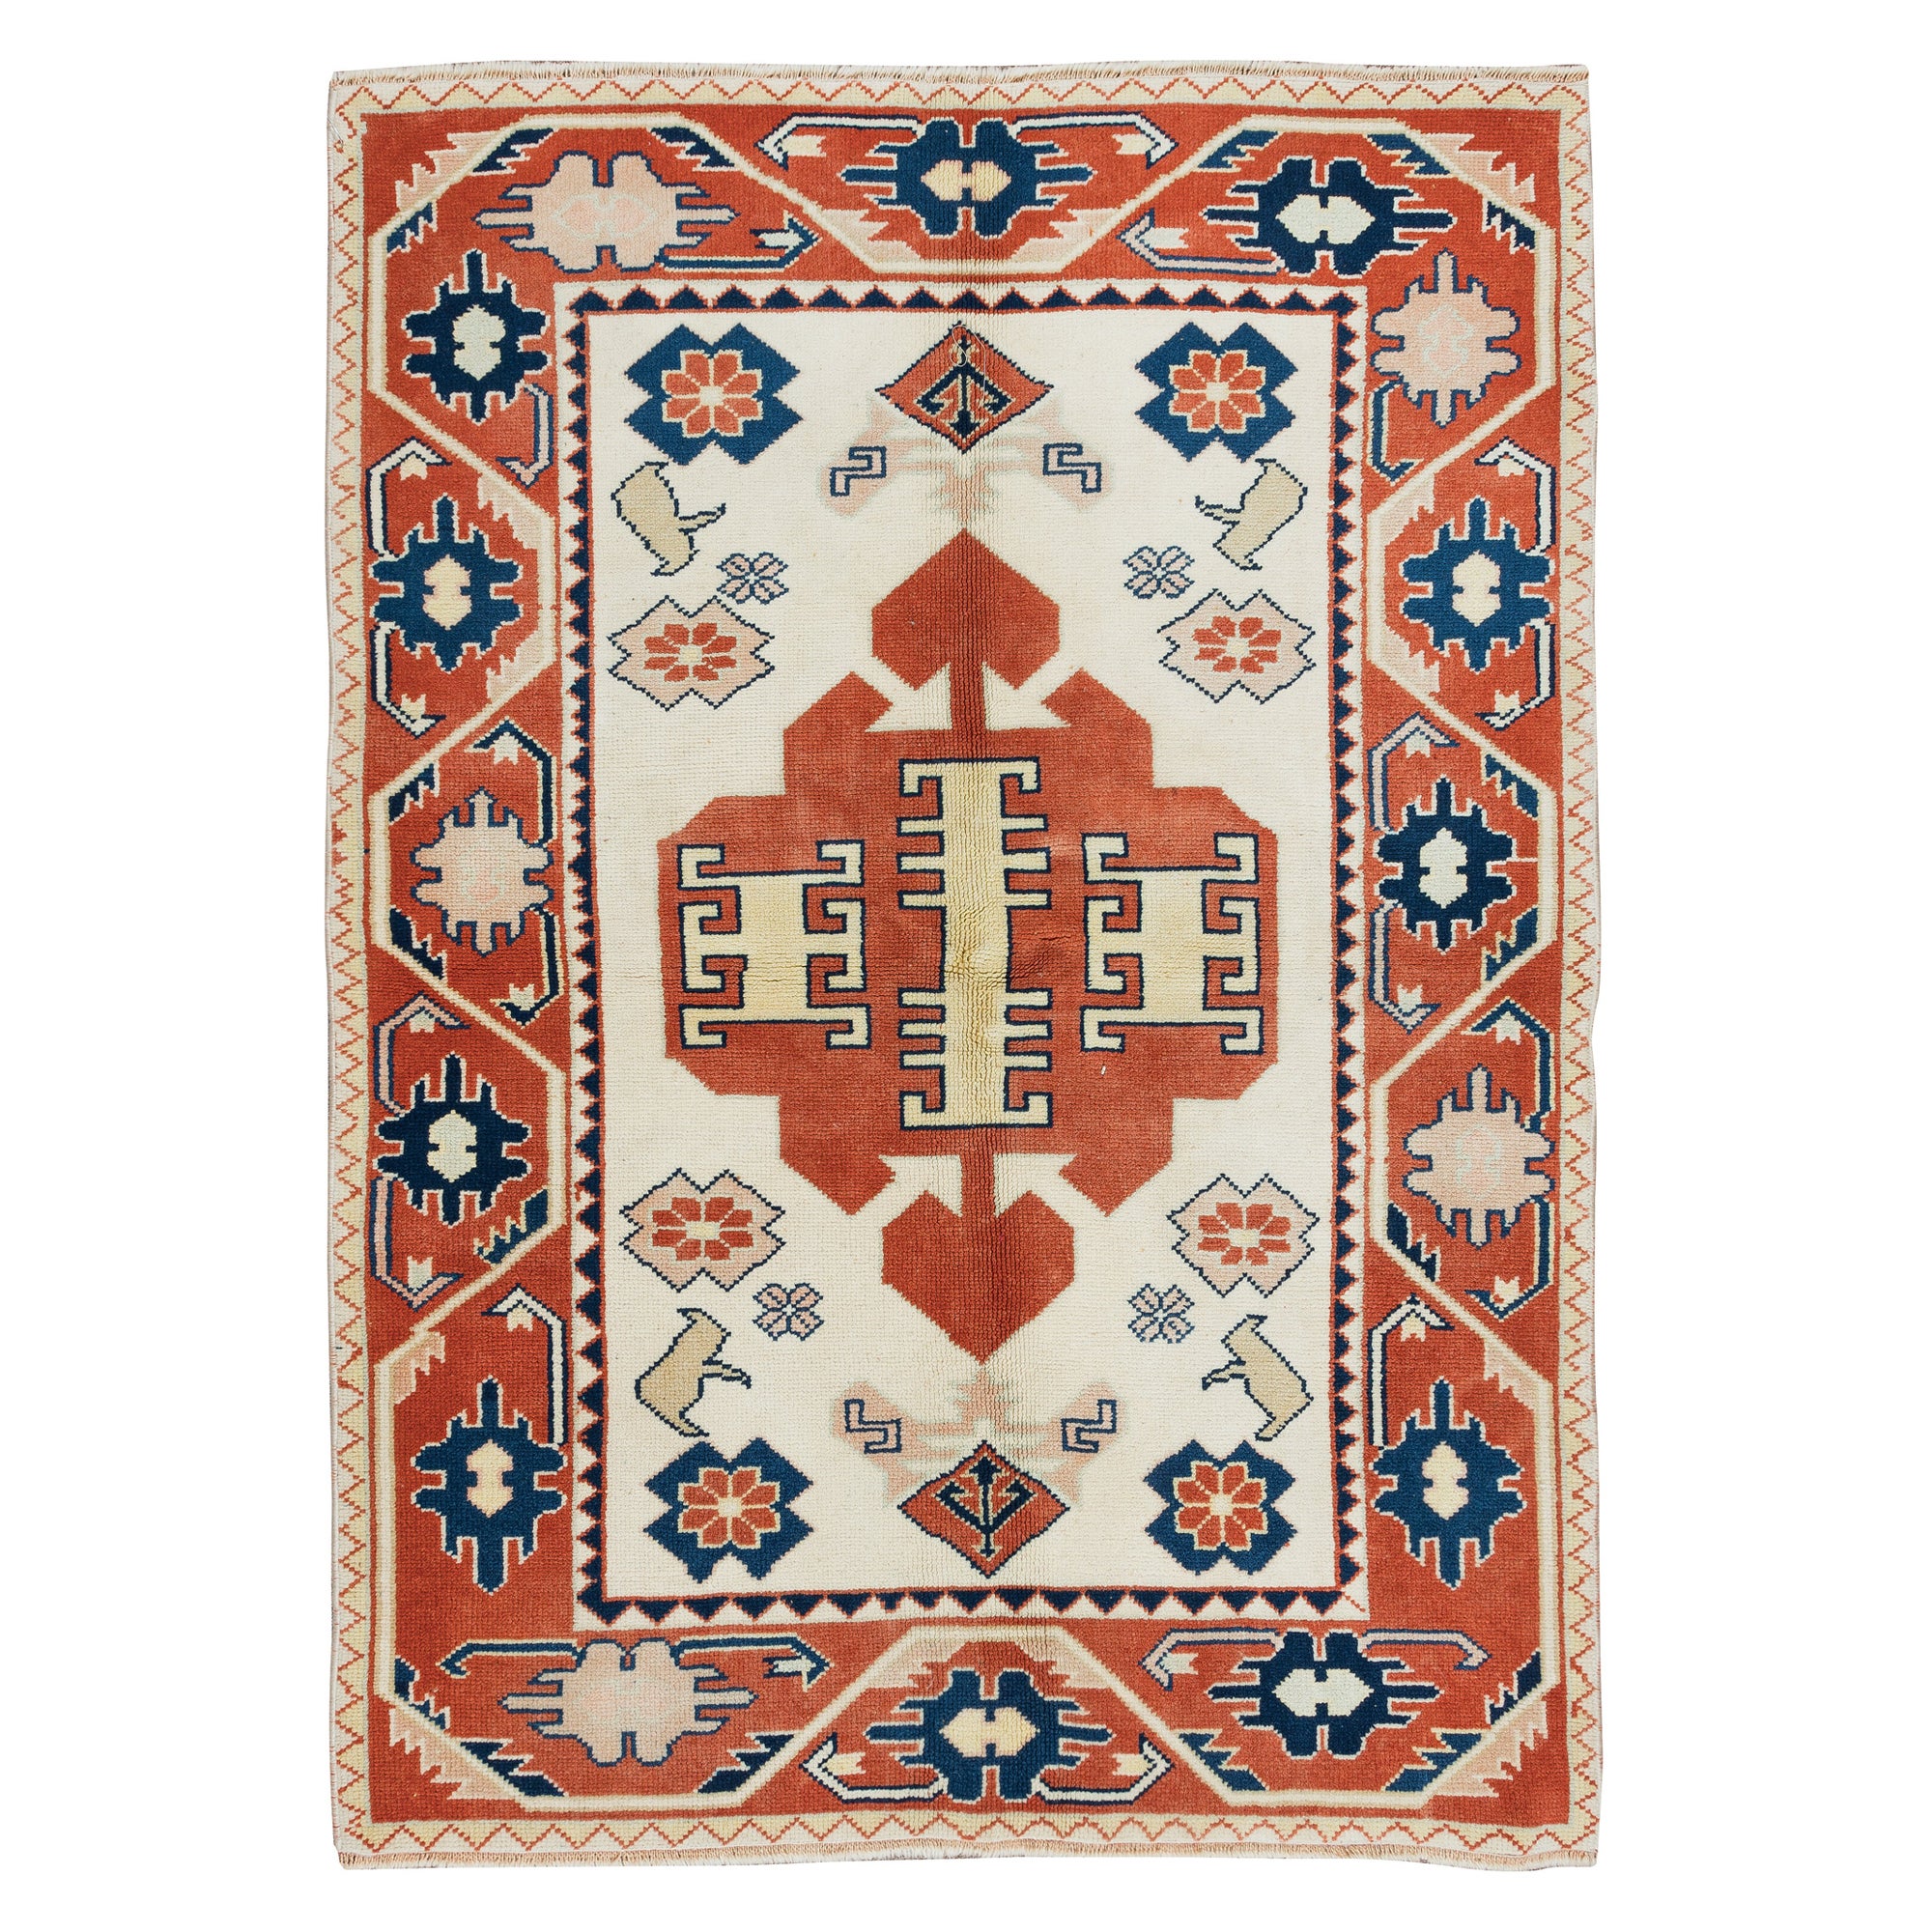 4x5.6 Ft Modern Handmade Geometric Turkish Rug in Cream, Red and Blue Colors